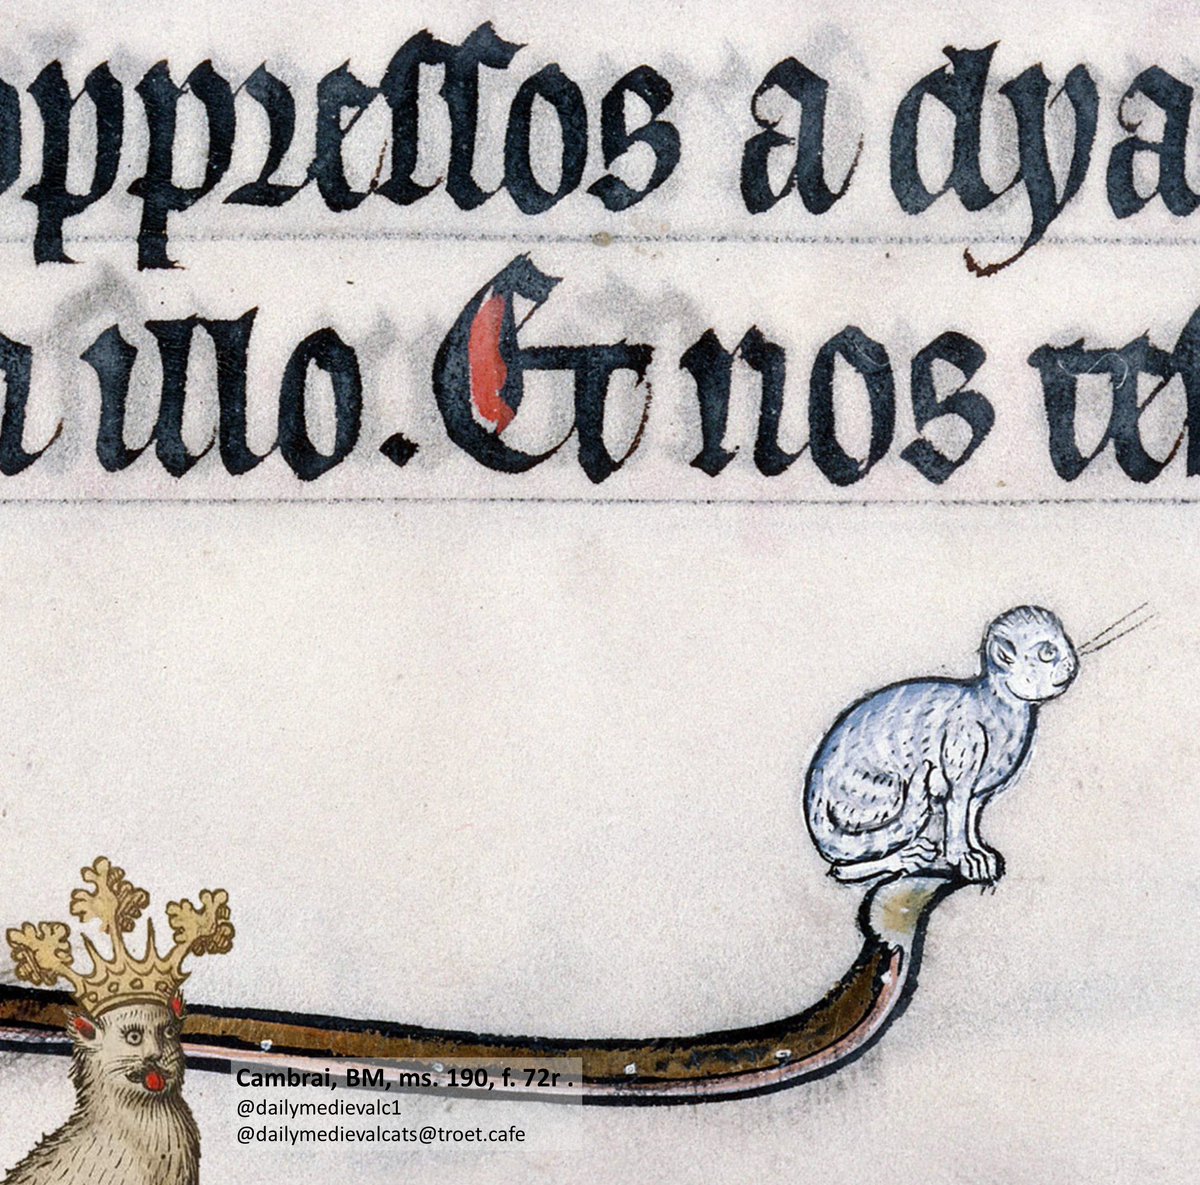 Far out.

Ms: Cambrai, BM, ms. 190, f. 72r. #medievalcat #medievaltwitter